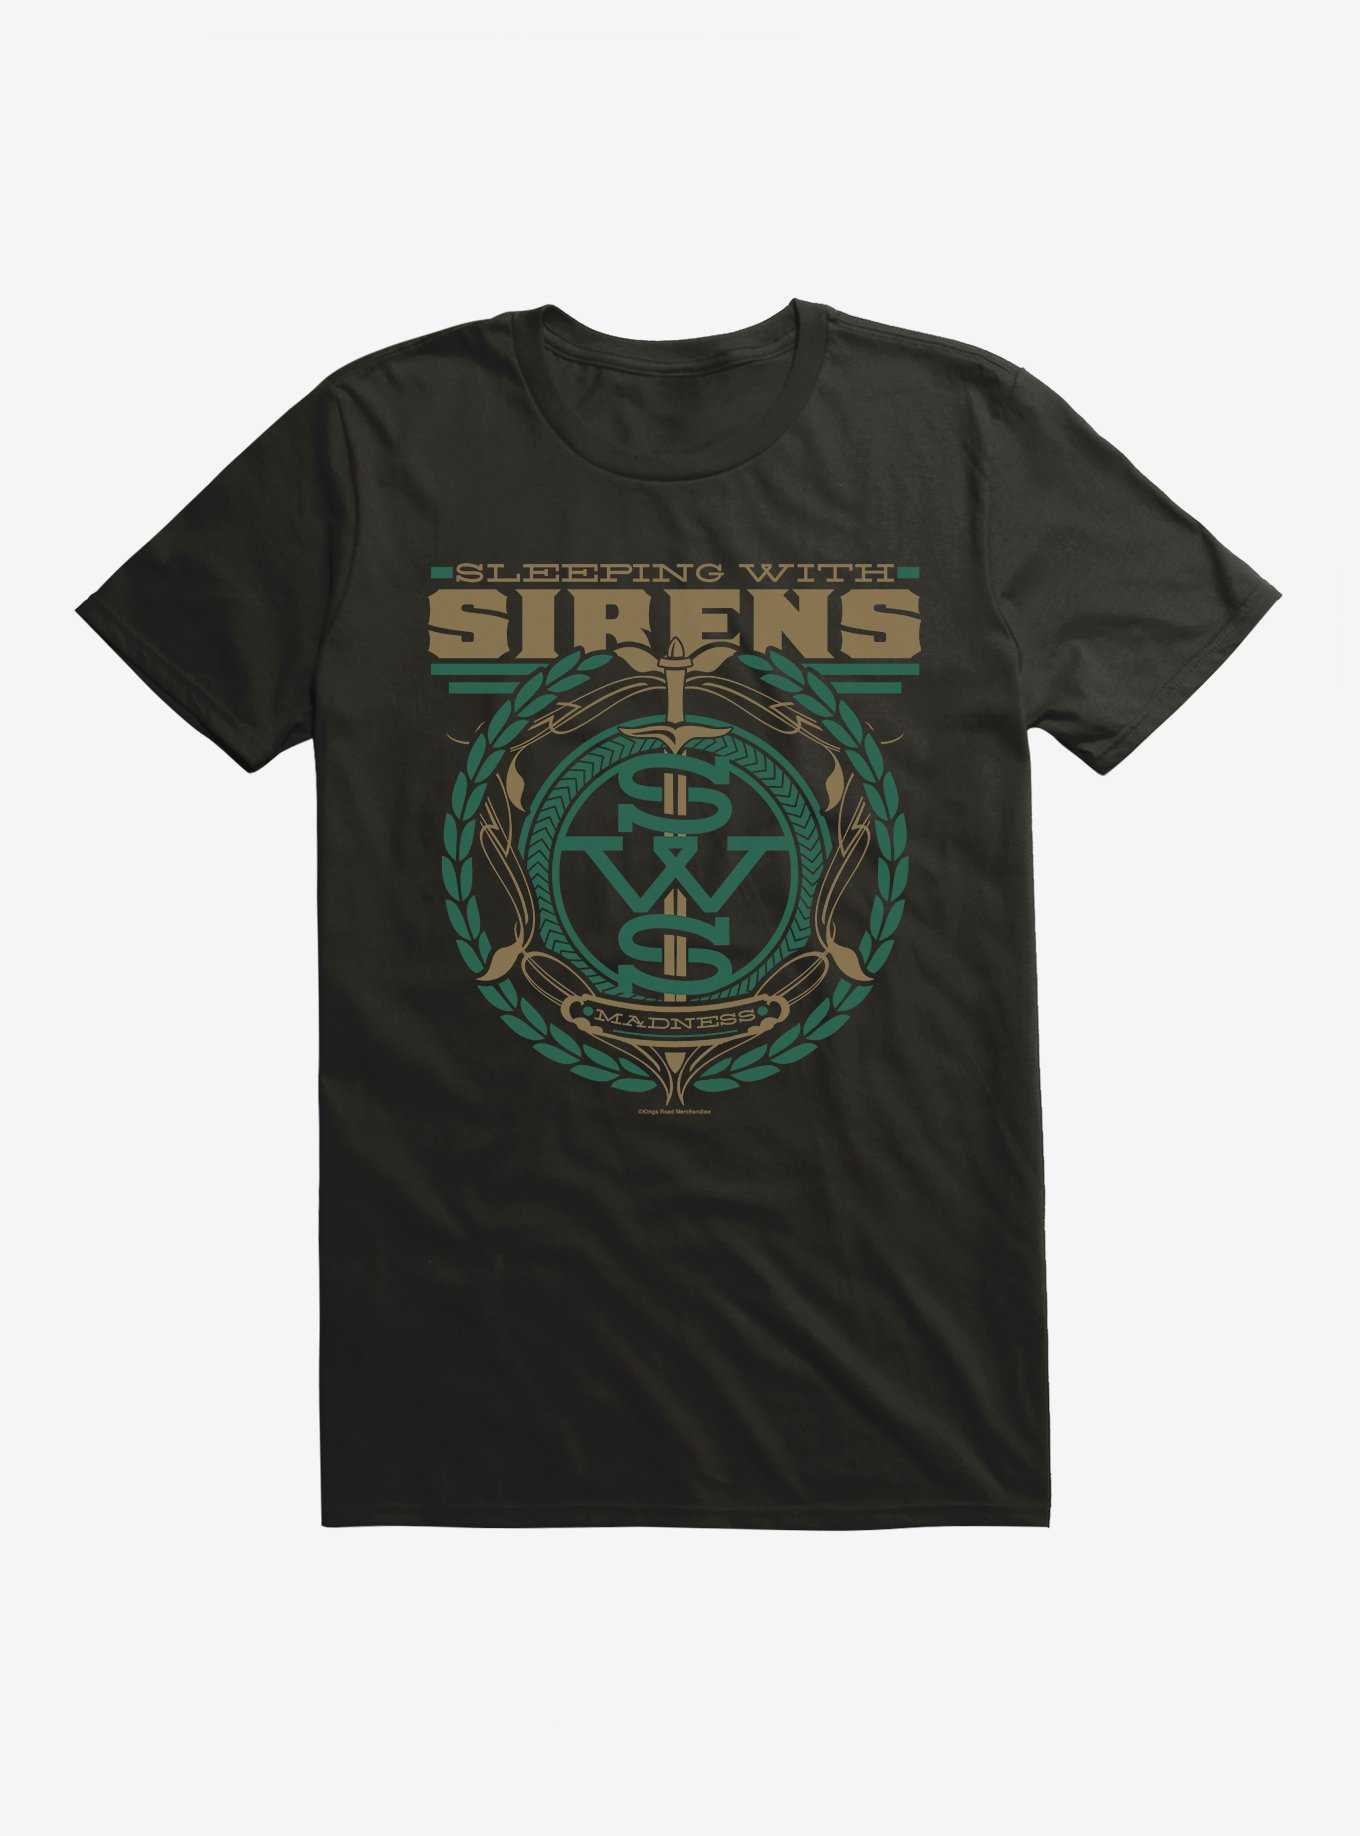 Sleeping With Sirens Dagger Crest T-Shirt, , hi-res